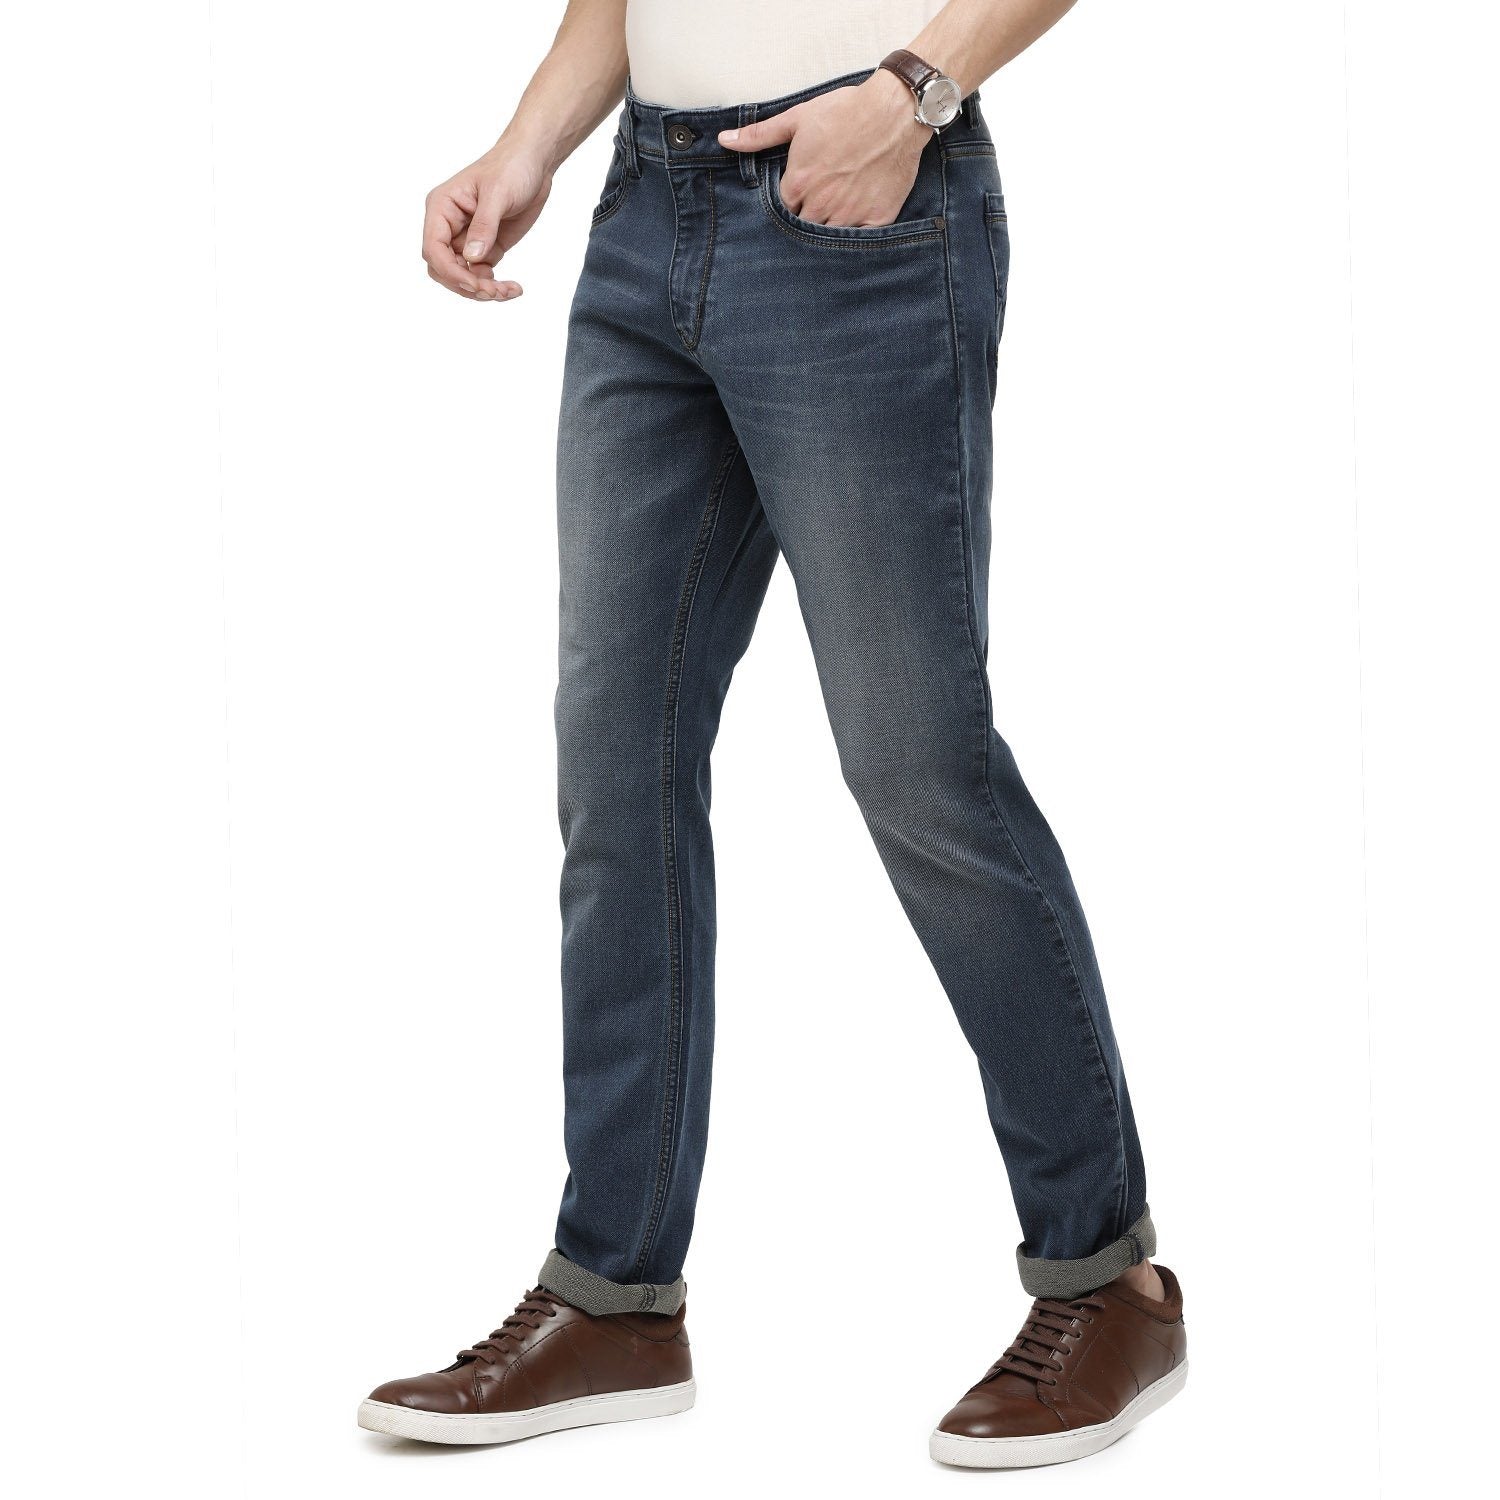 Mens Plain Lycra Jeans (Blue) in Pune at best price by Mahalaxmi Garments  Jeans Company - Justdial